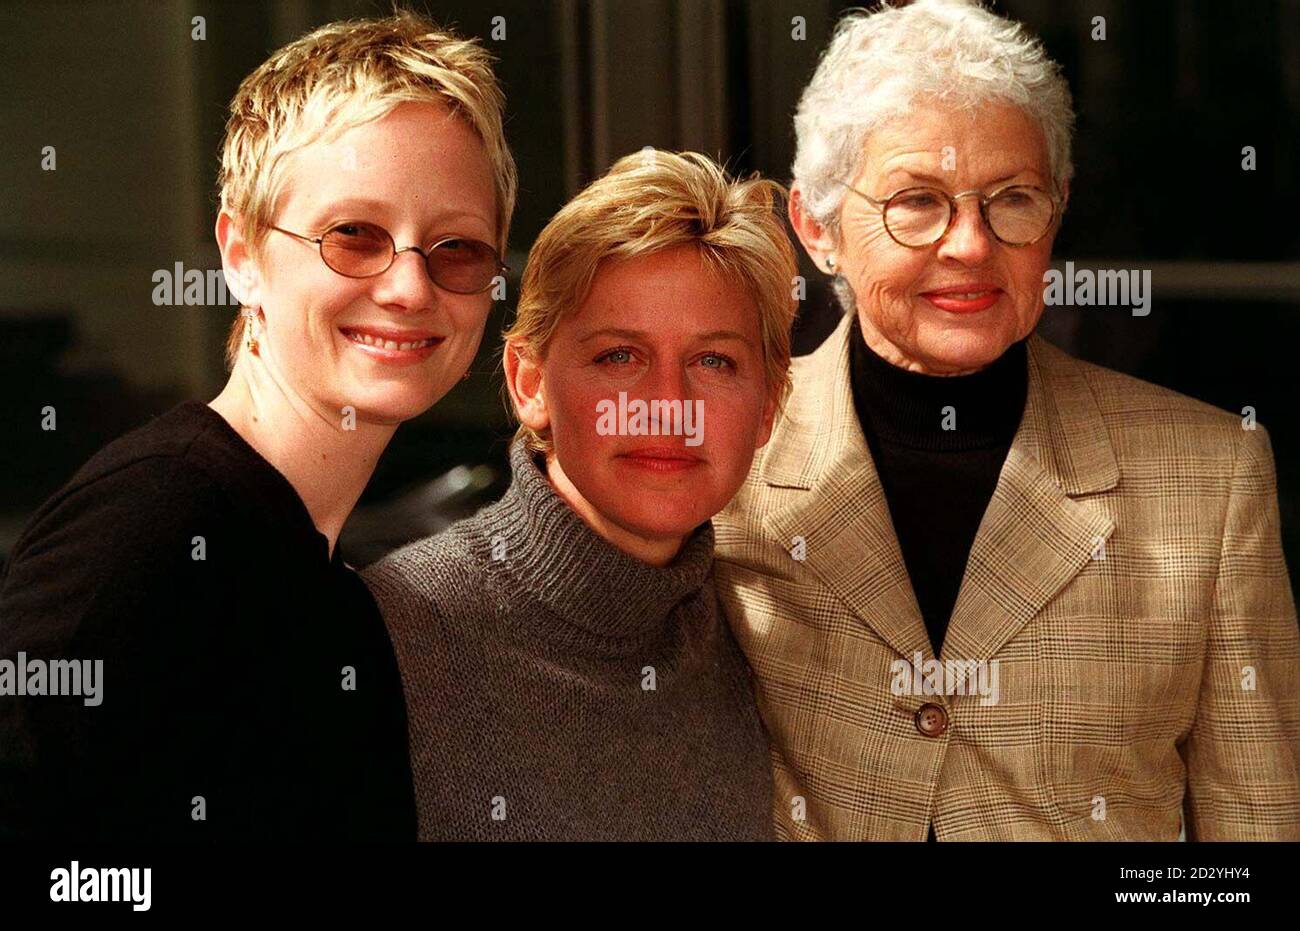 PA NEWS PHOTO 20/4/98 ACTRESS ELLEN DEGENERES STAR OF CHANNEL 4  TELEVISION'S SERIES "ELLEN" (CENTRE) POSES WITH HER PARTNER ANNE HECHE AND  HER MOTHER BETTY AT A PHOTOCALL IN LONDON TO PROMOTE